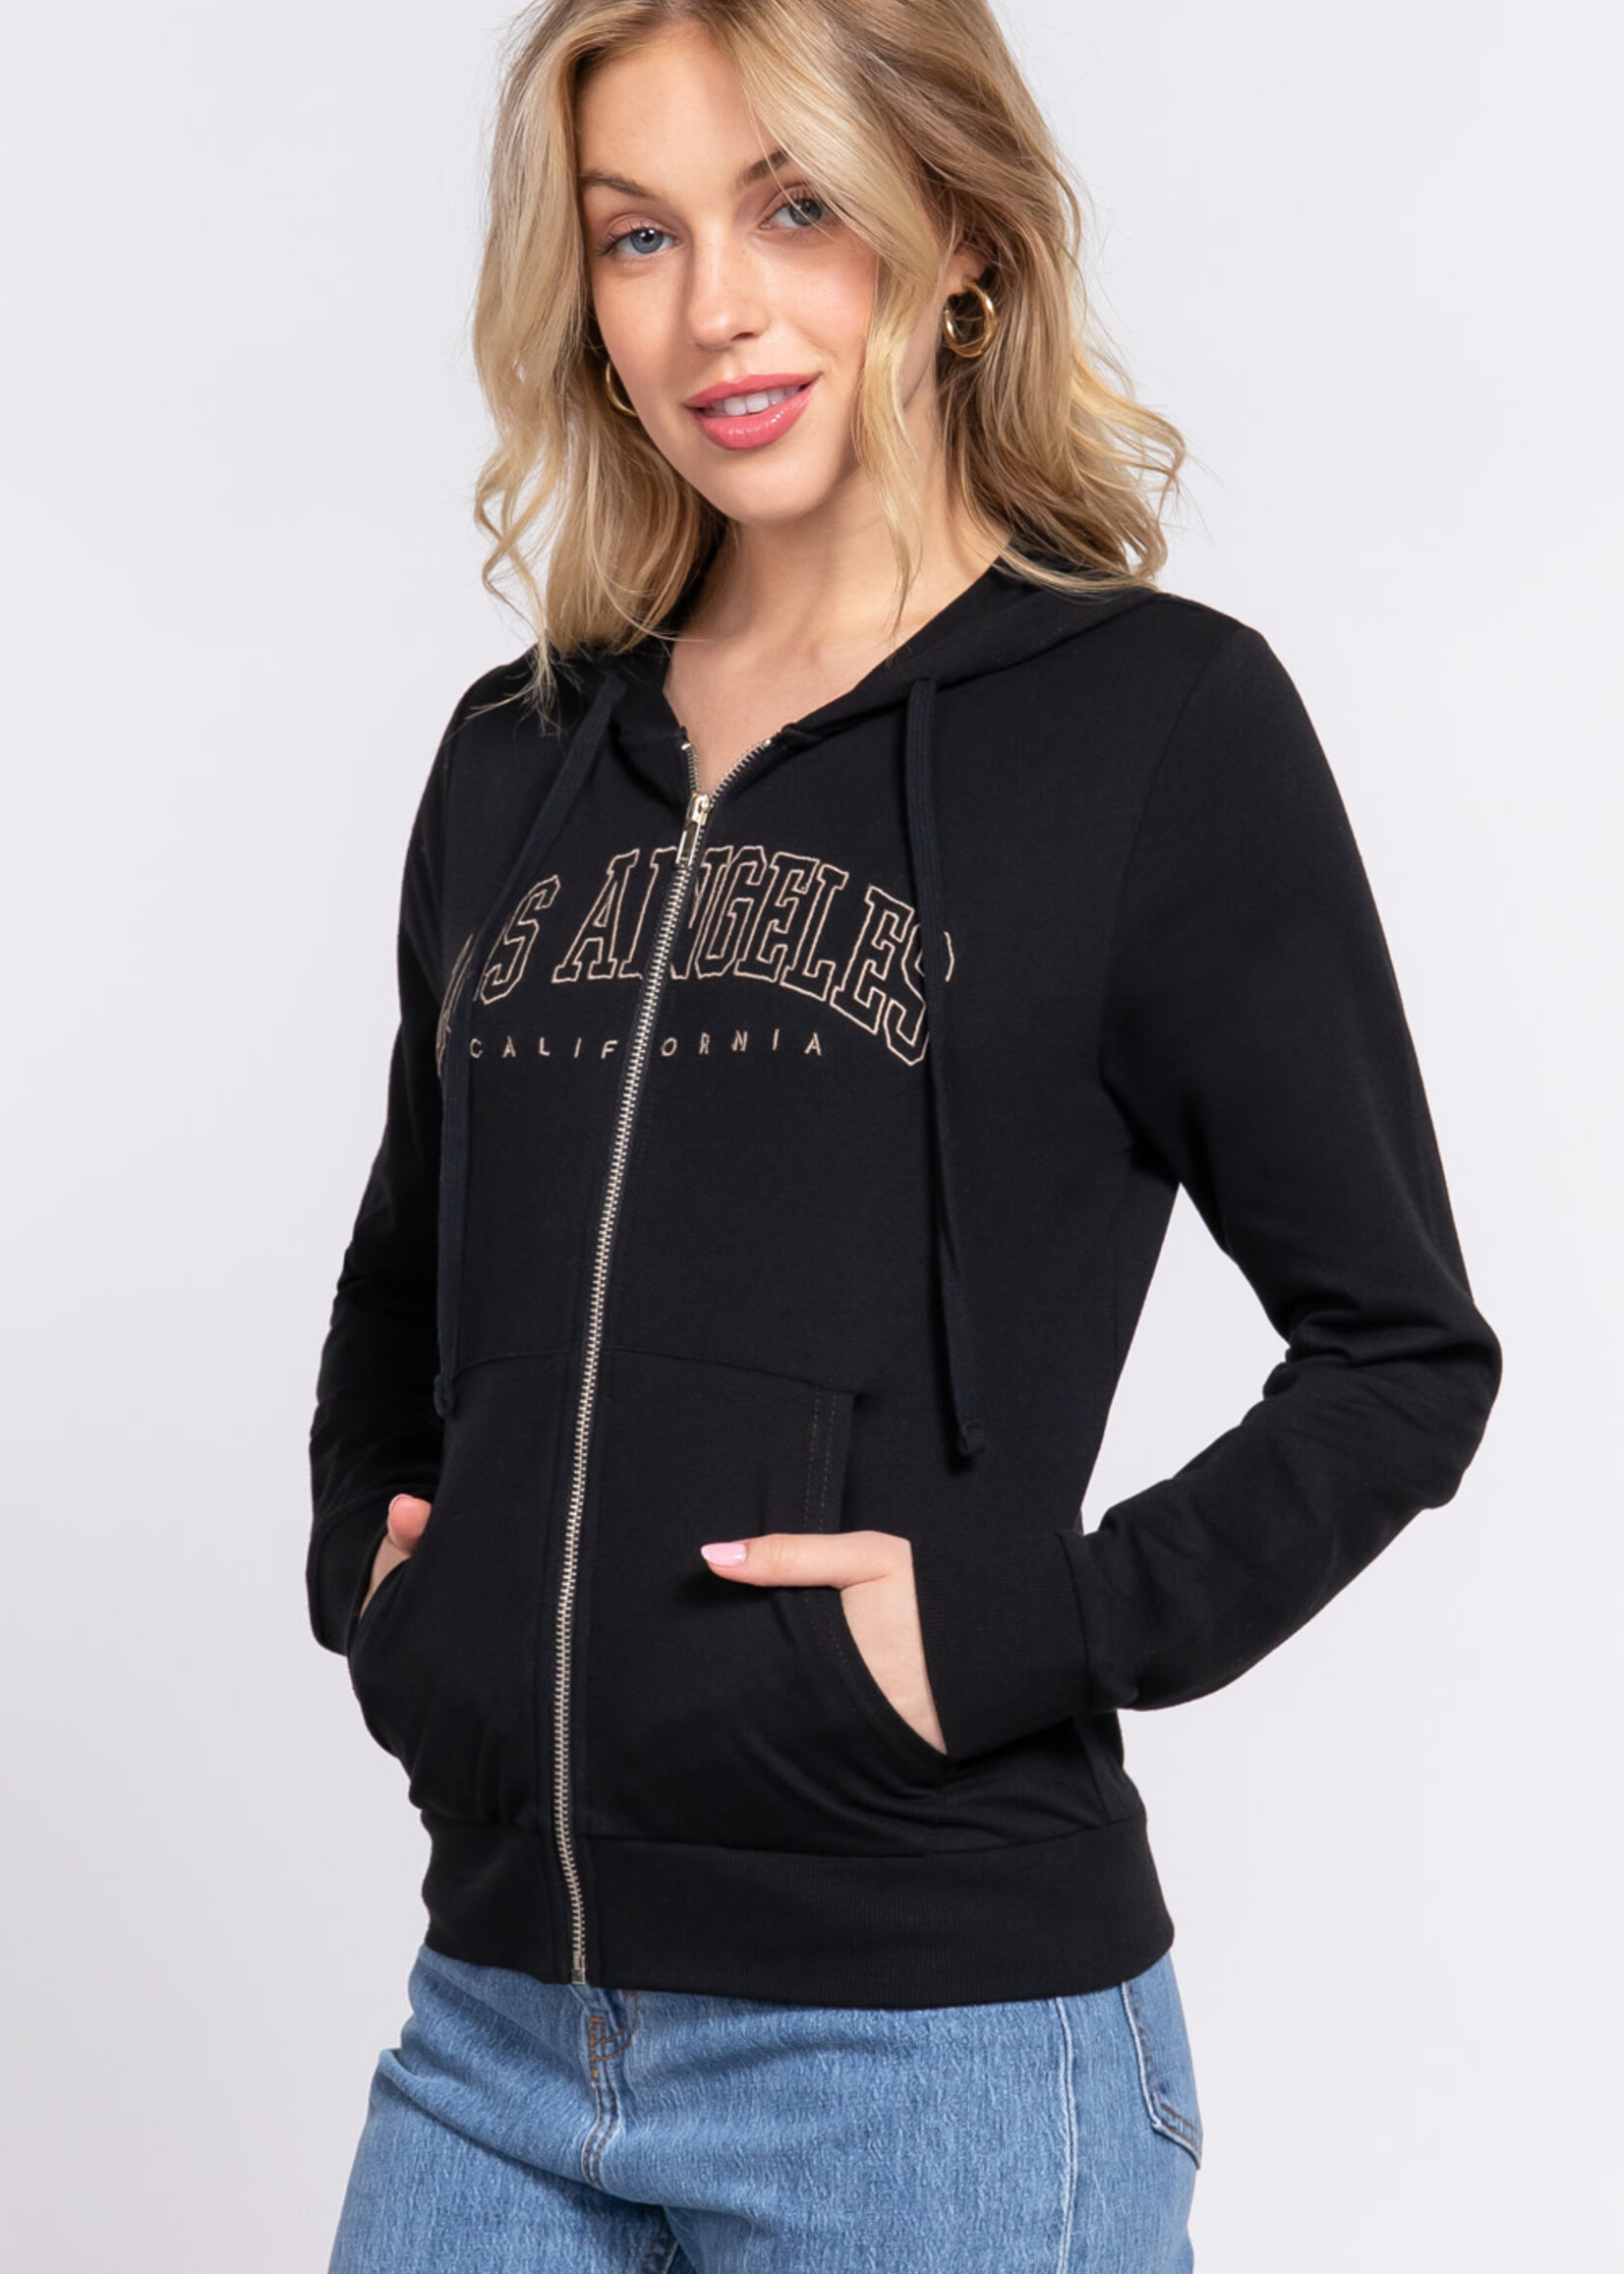 ACTIVE USA, INC. Active USA - Long Slv Embroidery Hoodie French Terry Jacket - J13571